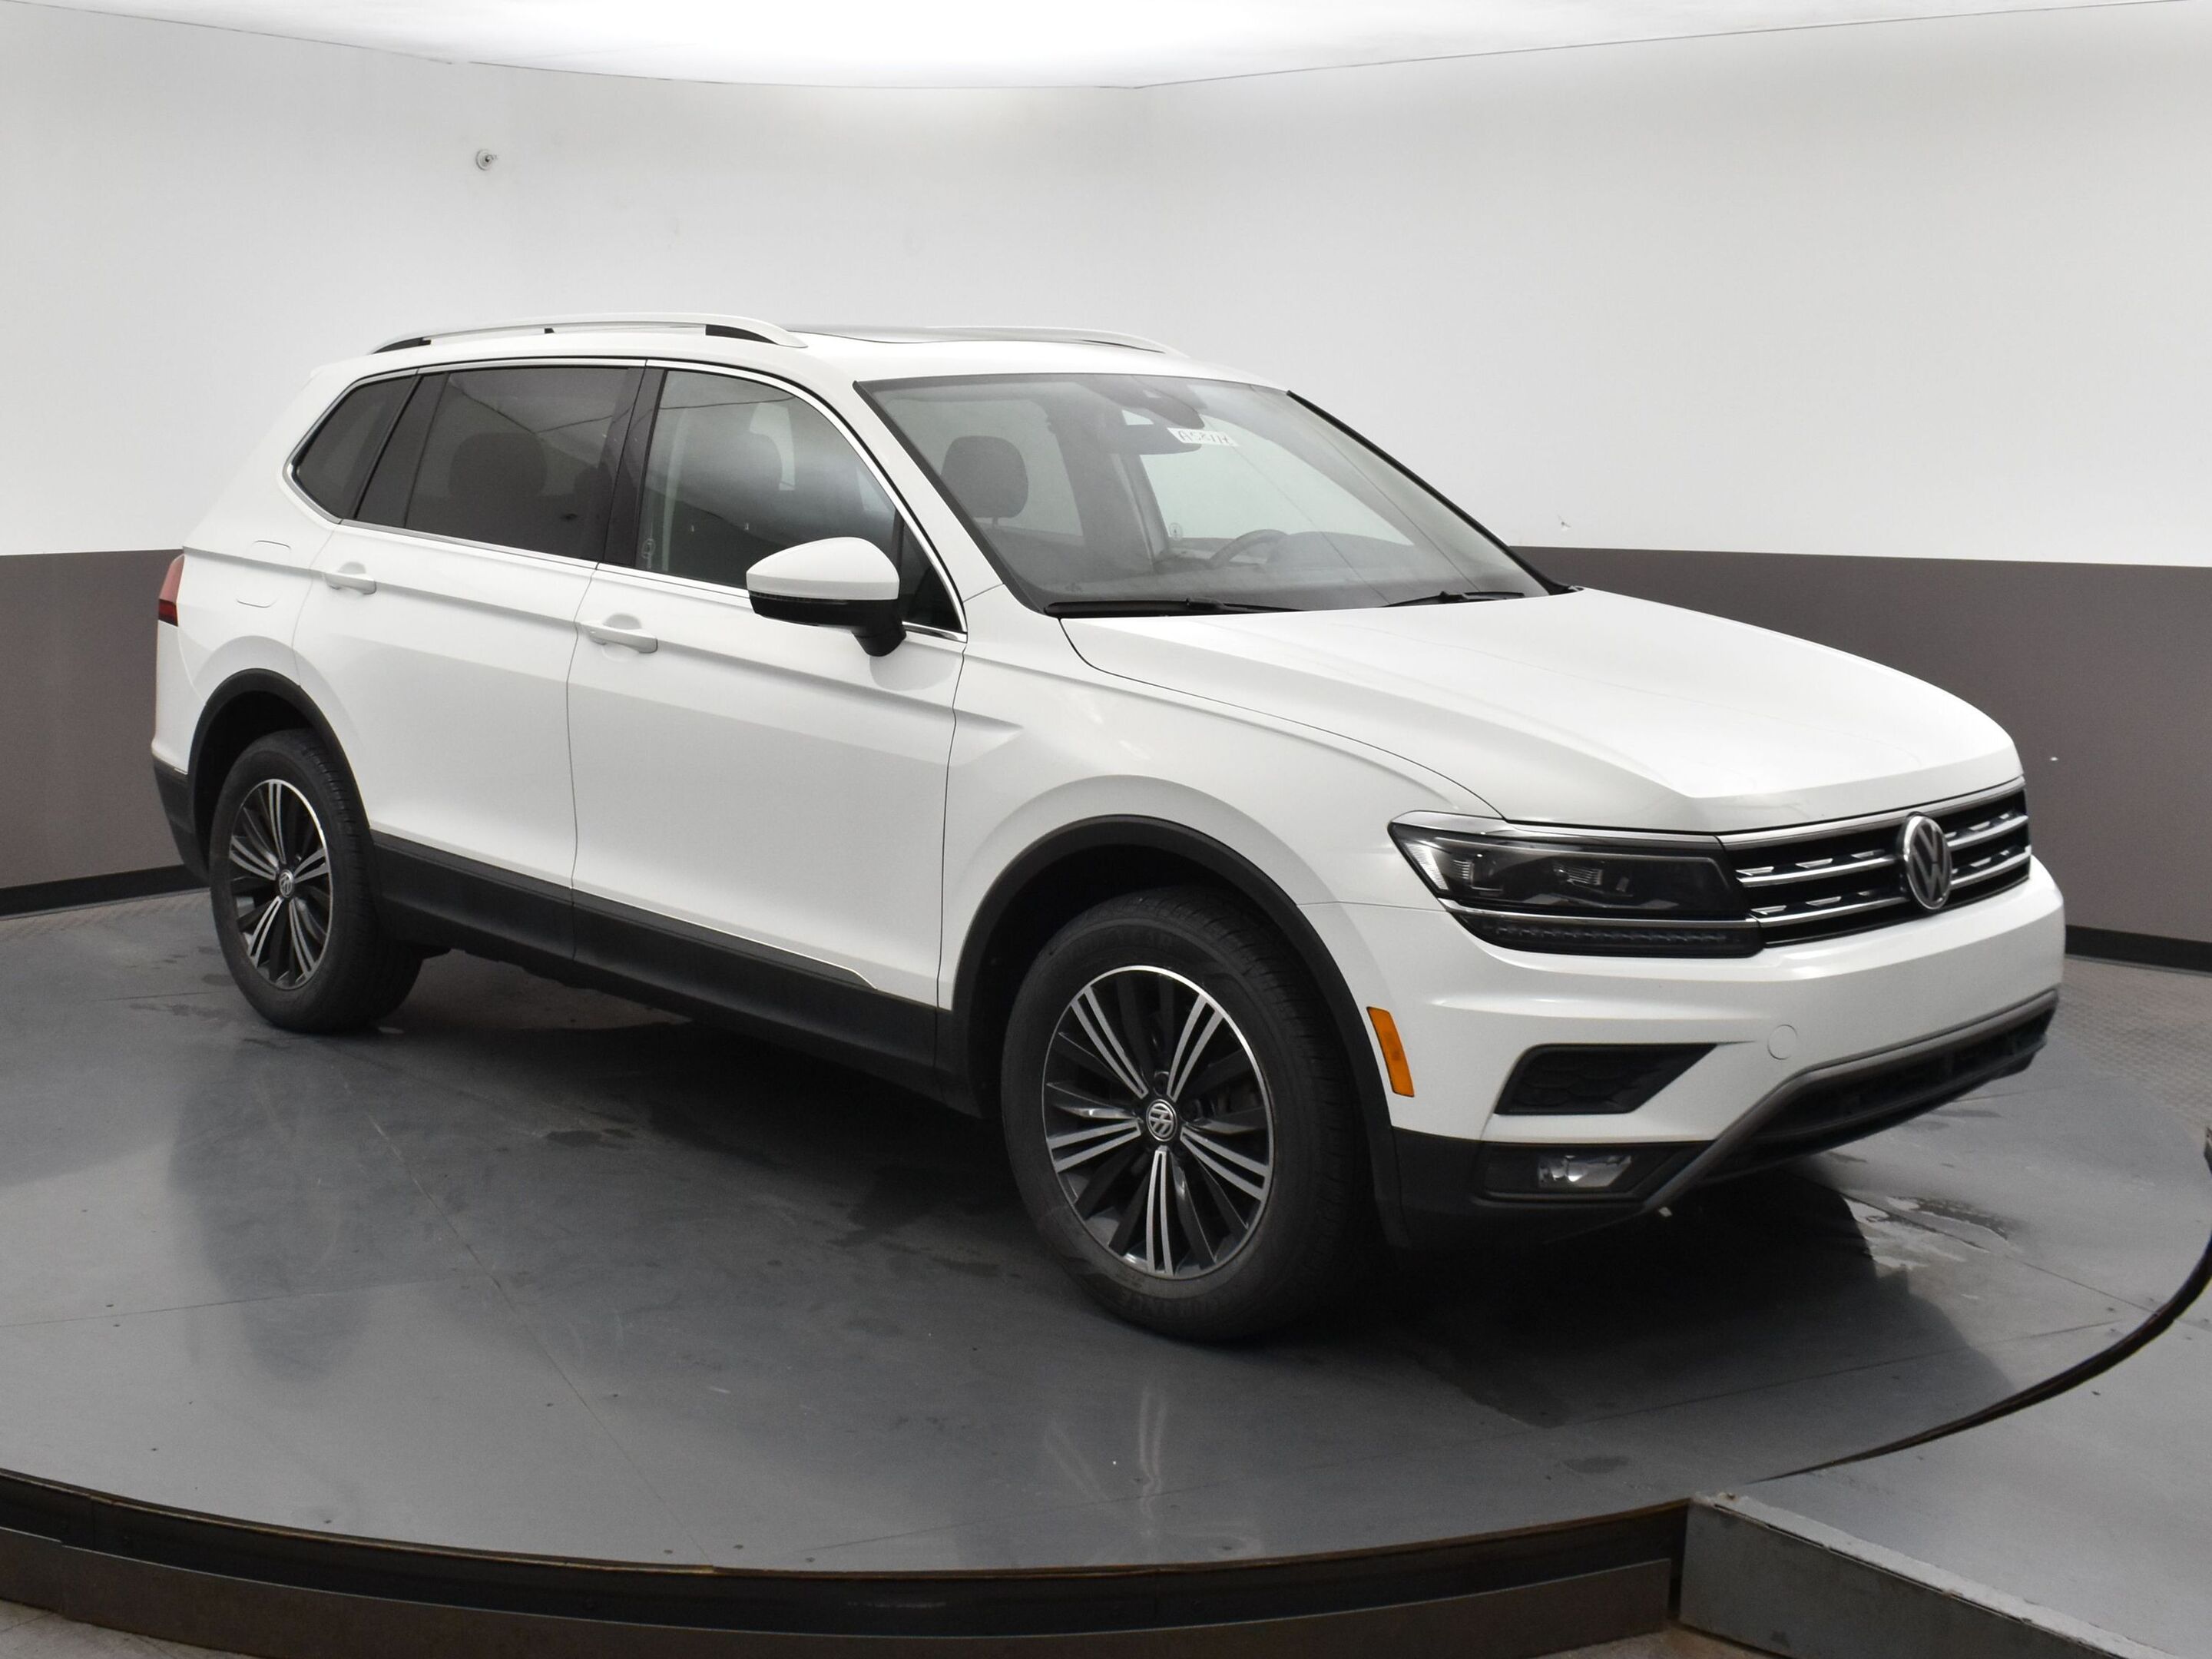 2018 Volkswagen Tiguan 2.0TSI HIGHLINE 8-SPEED AUTOMATIC 4MOTION in Pure 